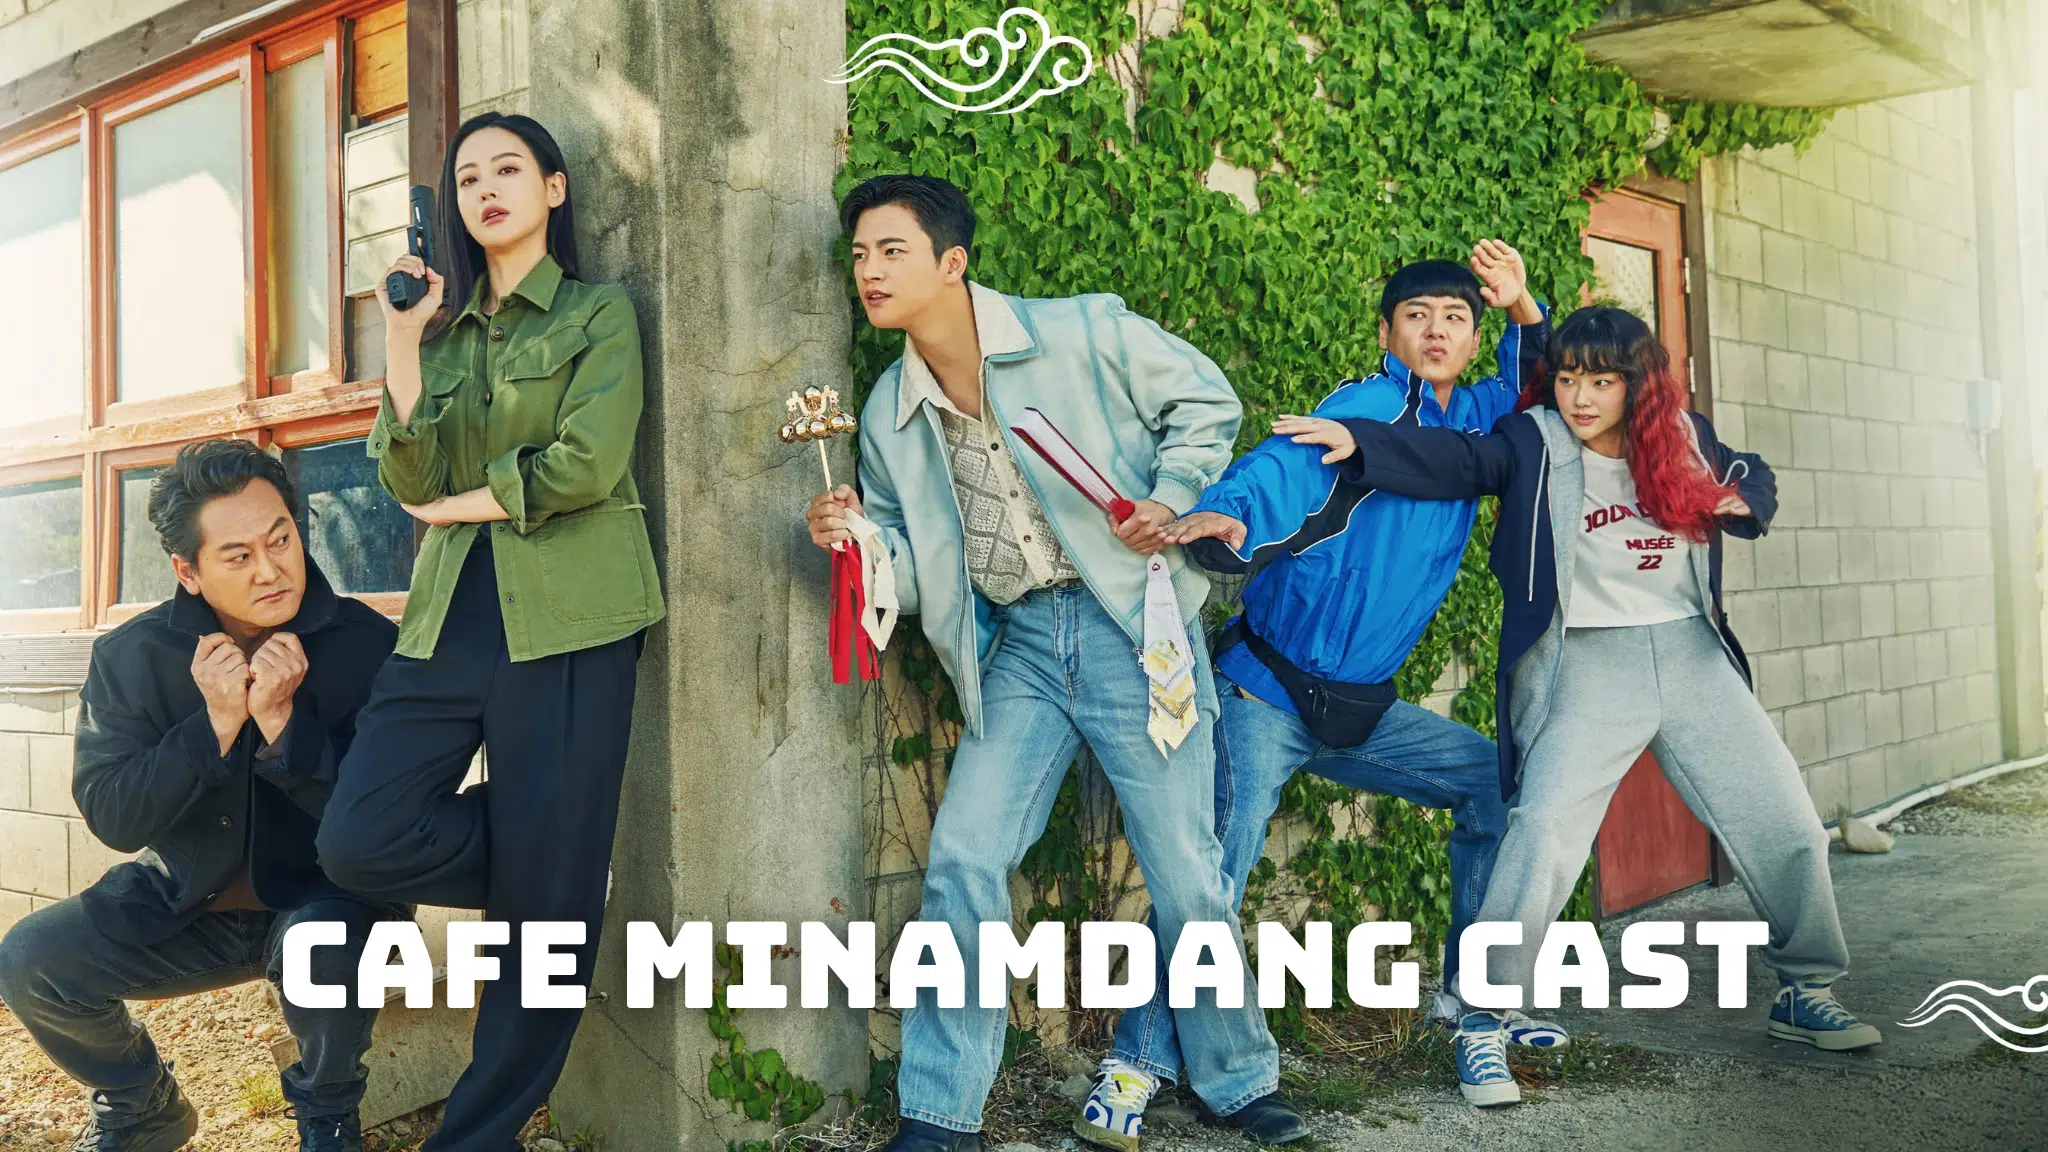 Cafe Minamdang Cast - Ages, Partners, Characters